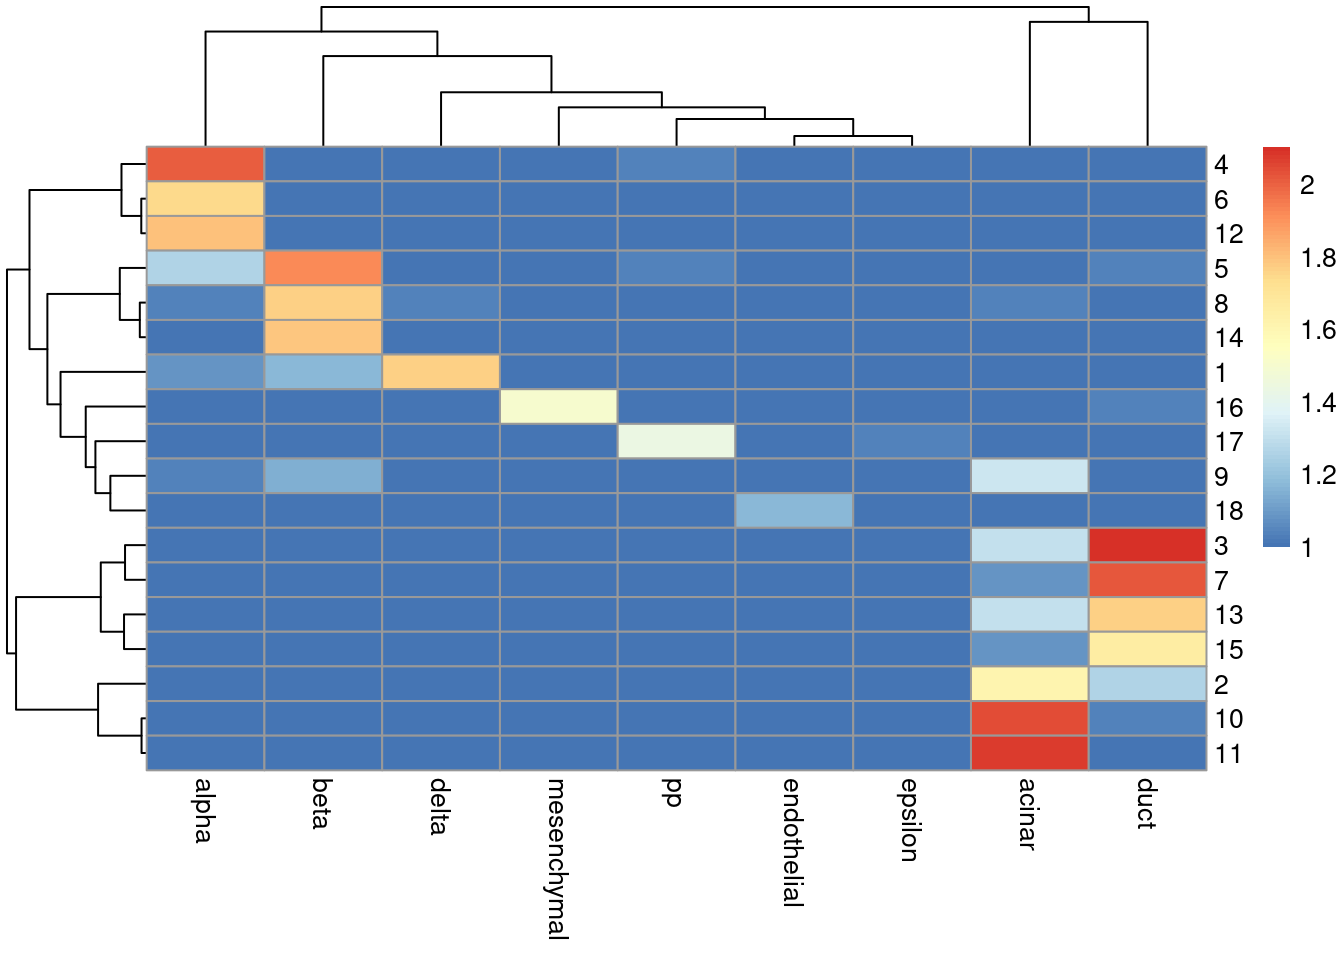 Heatmap of the log-transformed number of cells in each combination of label (column) and cluster (row) in the Grun dataset.